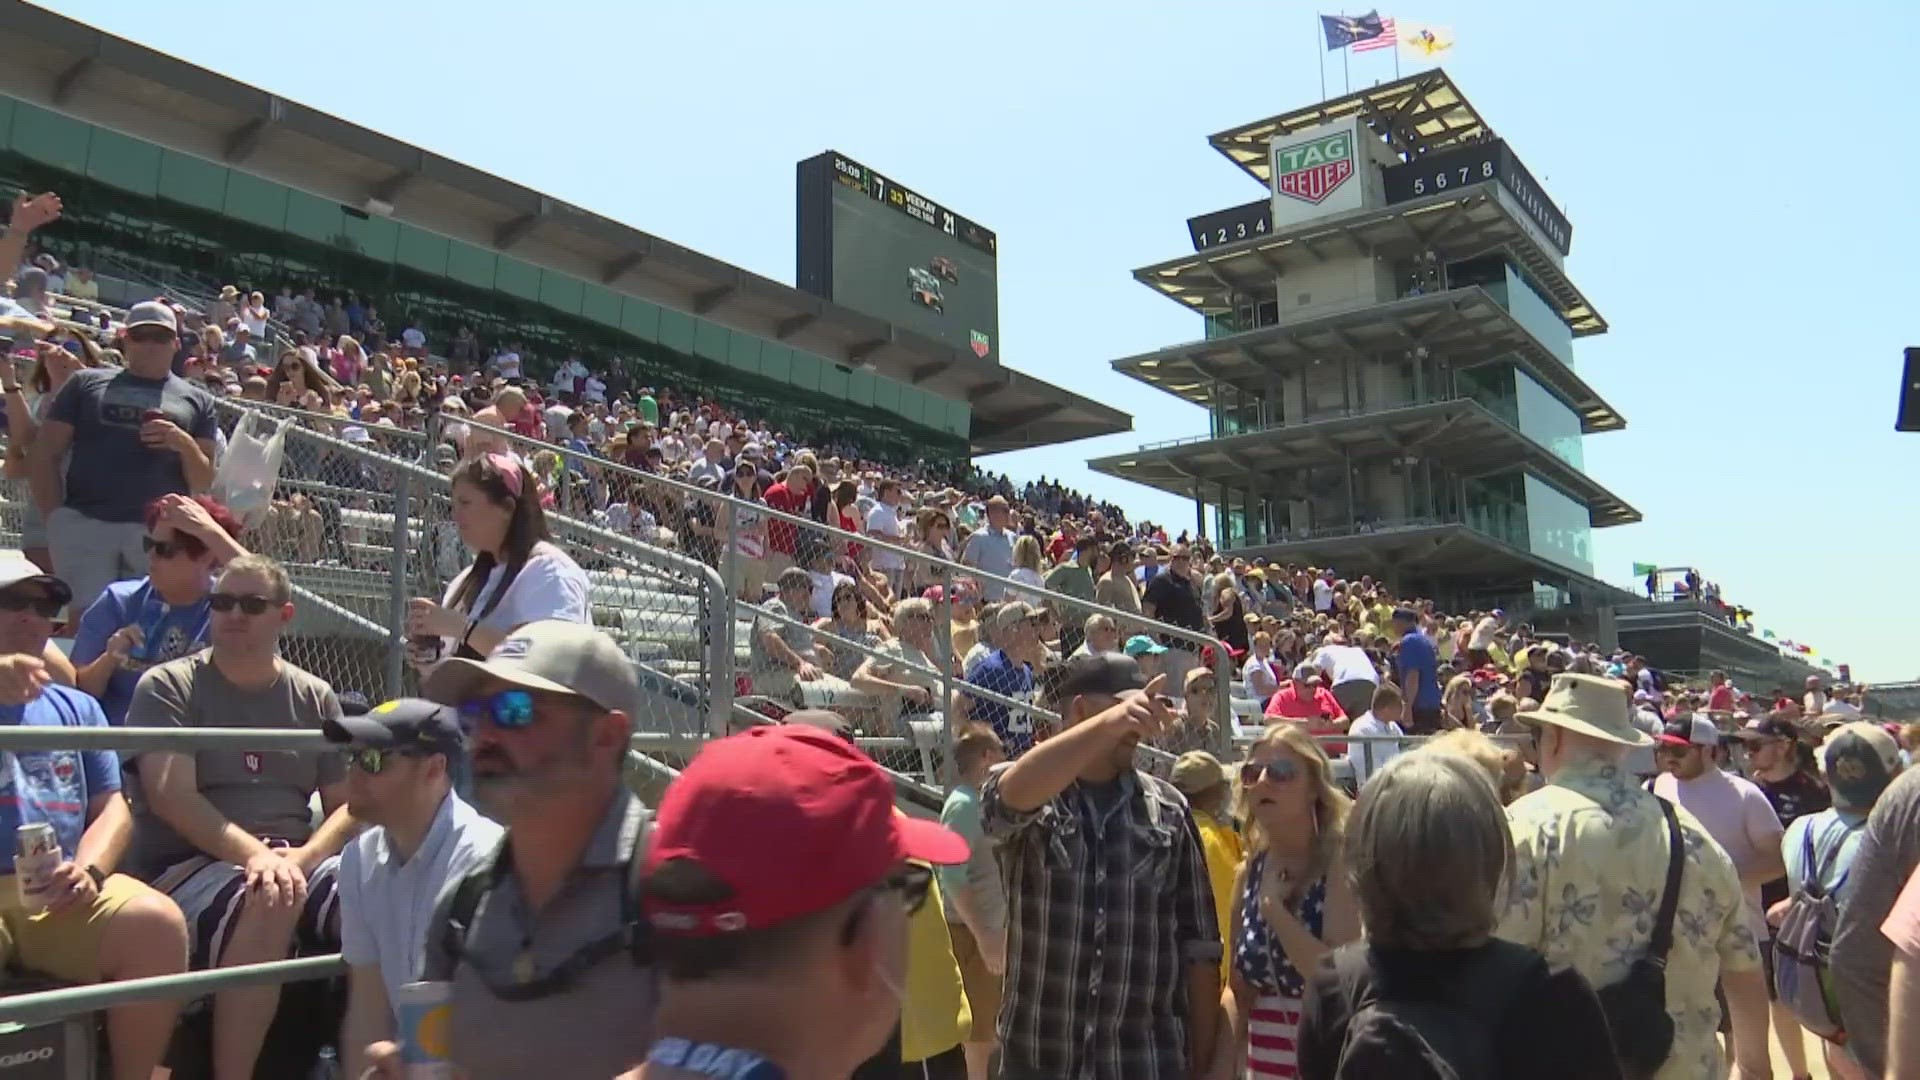 The weather was perfect for Carb Day festivities at the Indianapolis Motor Speedway.